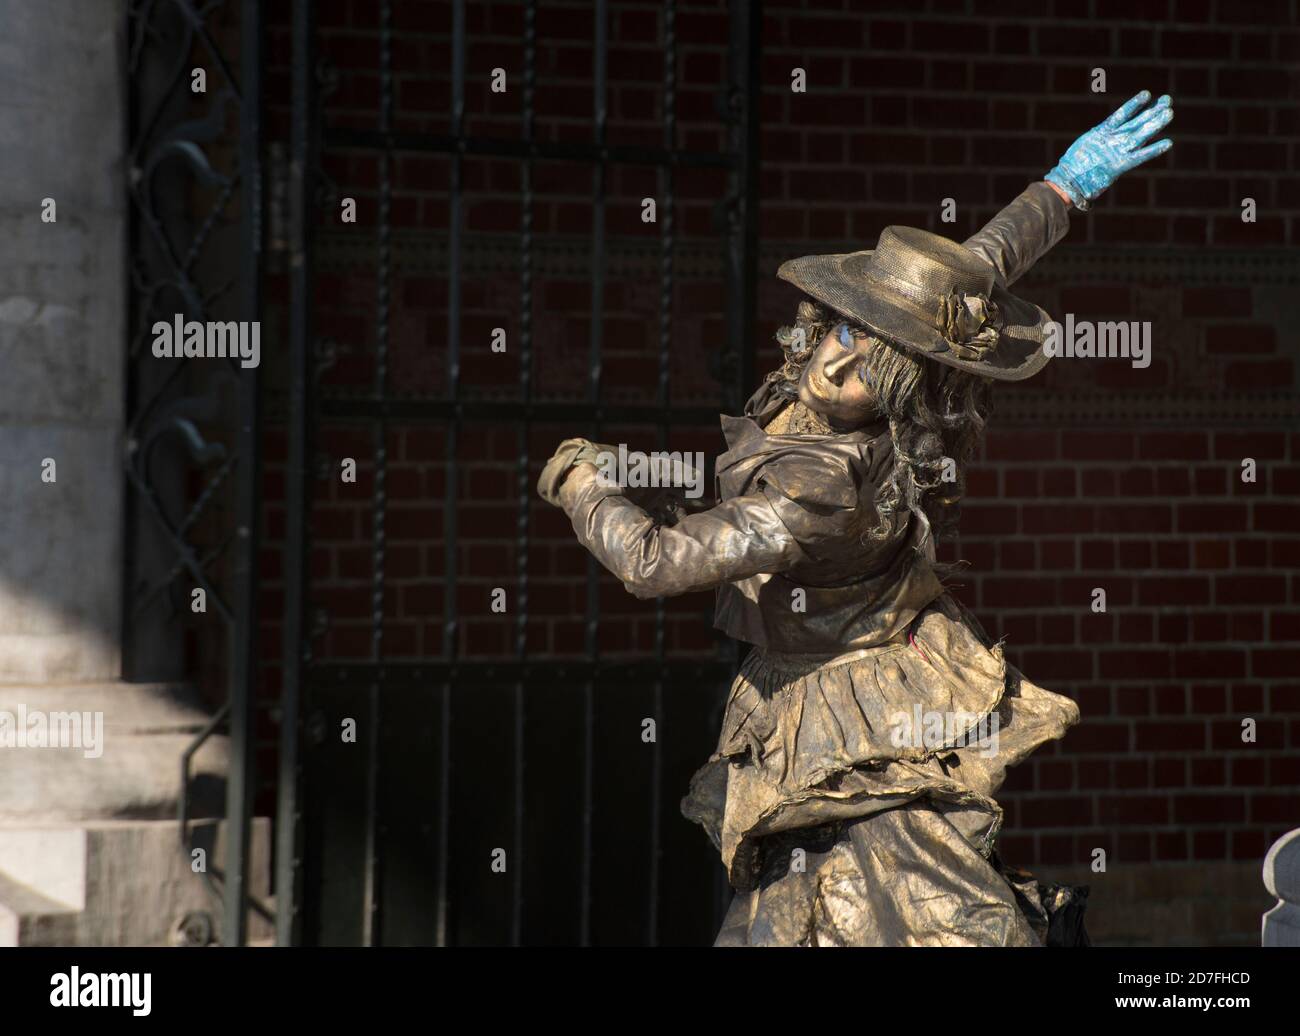 February 18th 2018 - Amsterdam, The Netherlands. Living statue performer making a gesture pose infront of the entrance of het Rijksmuseum Amsterdam. Stock Photo